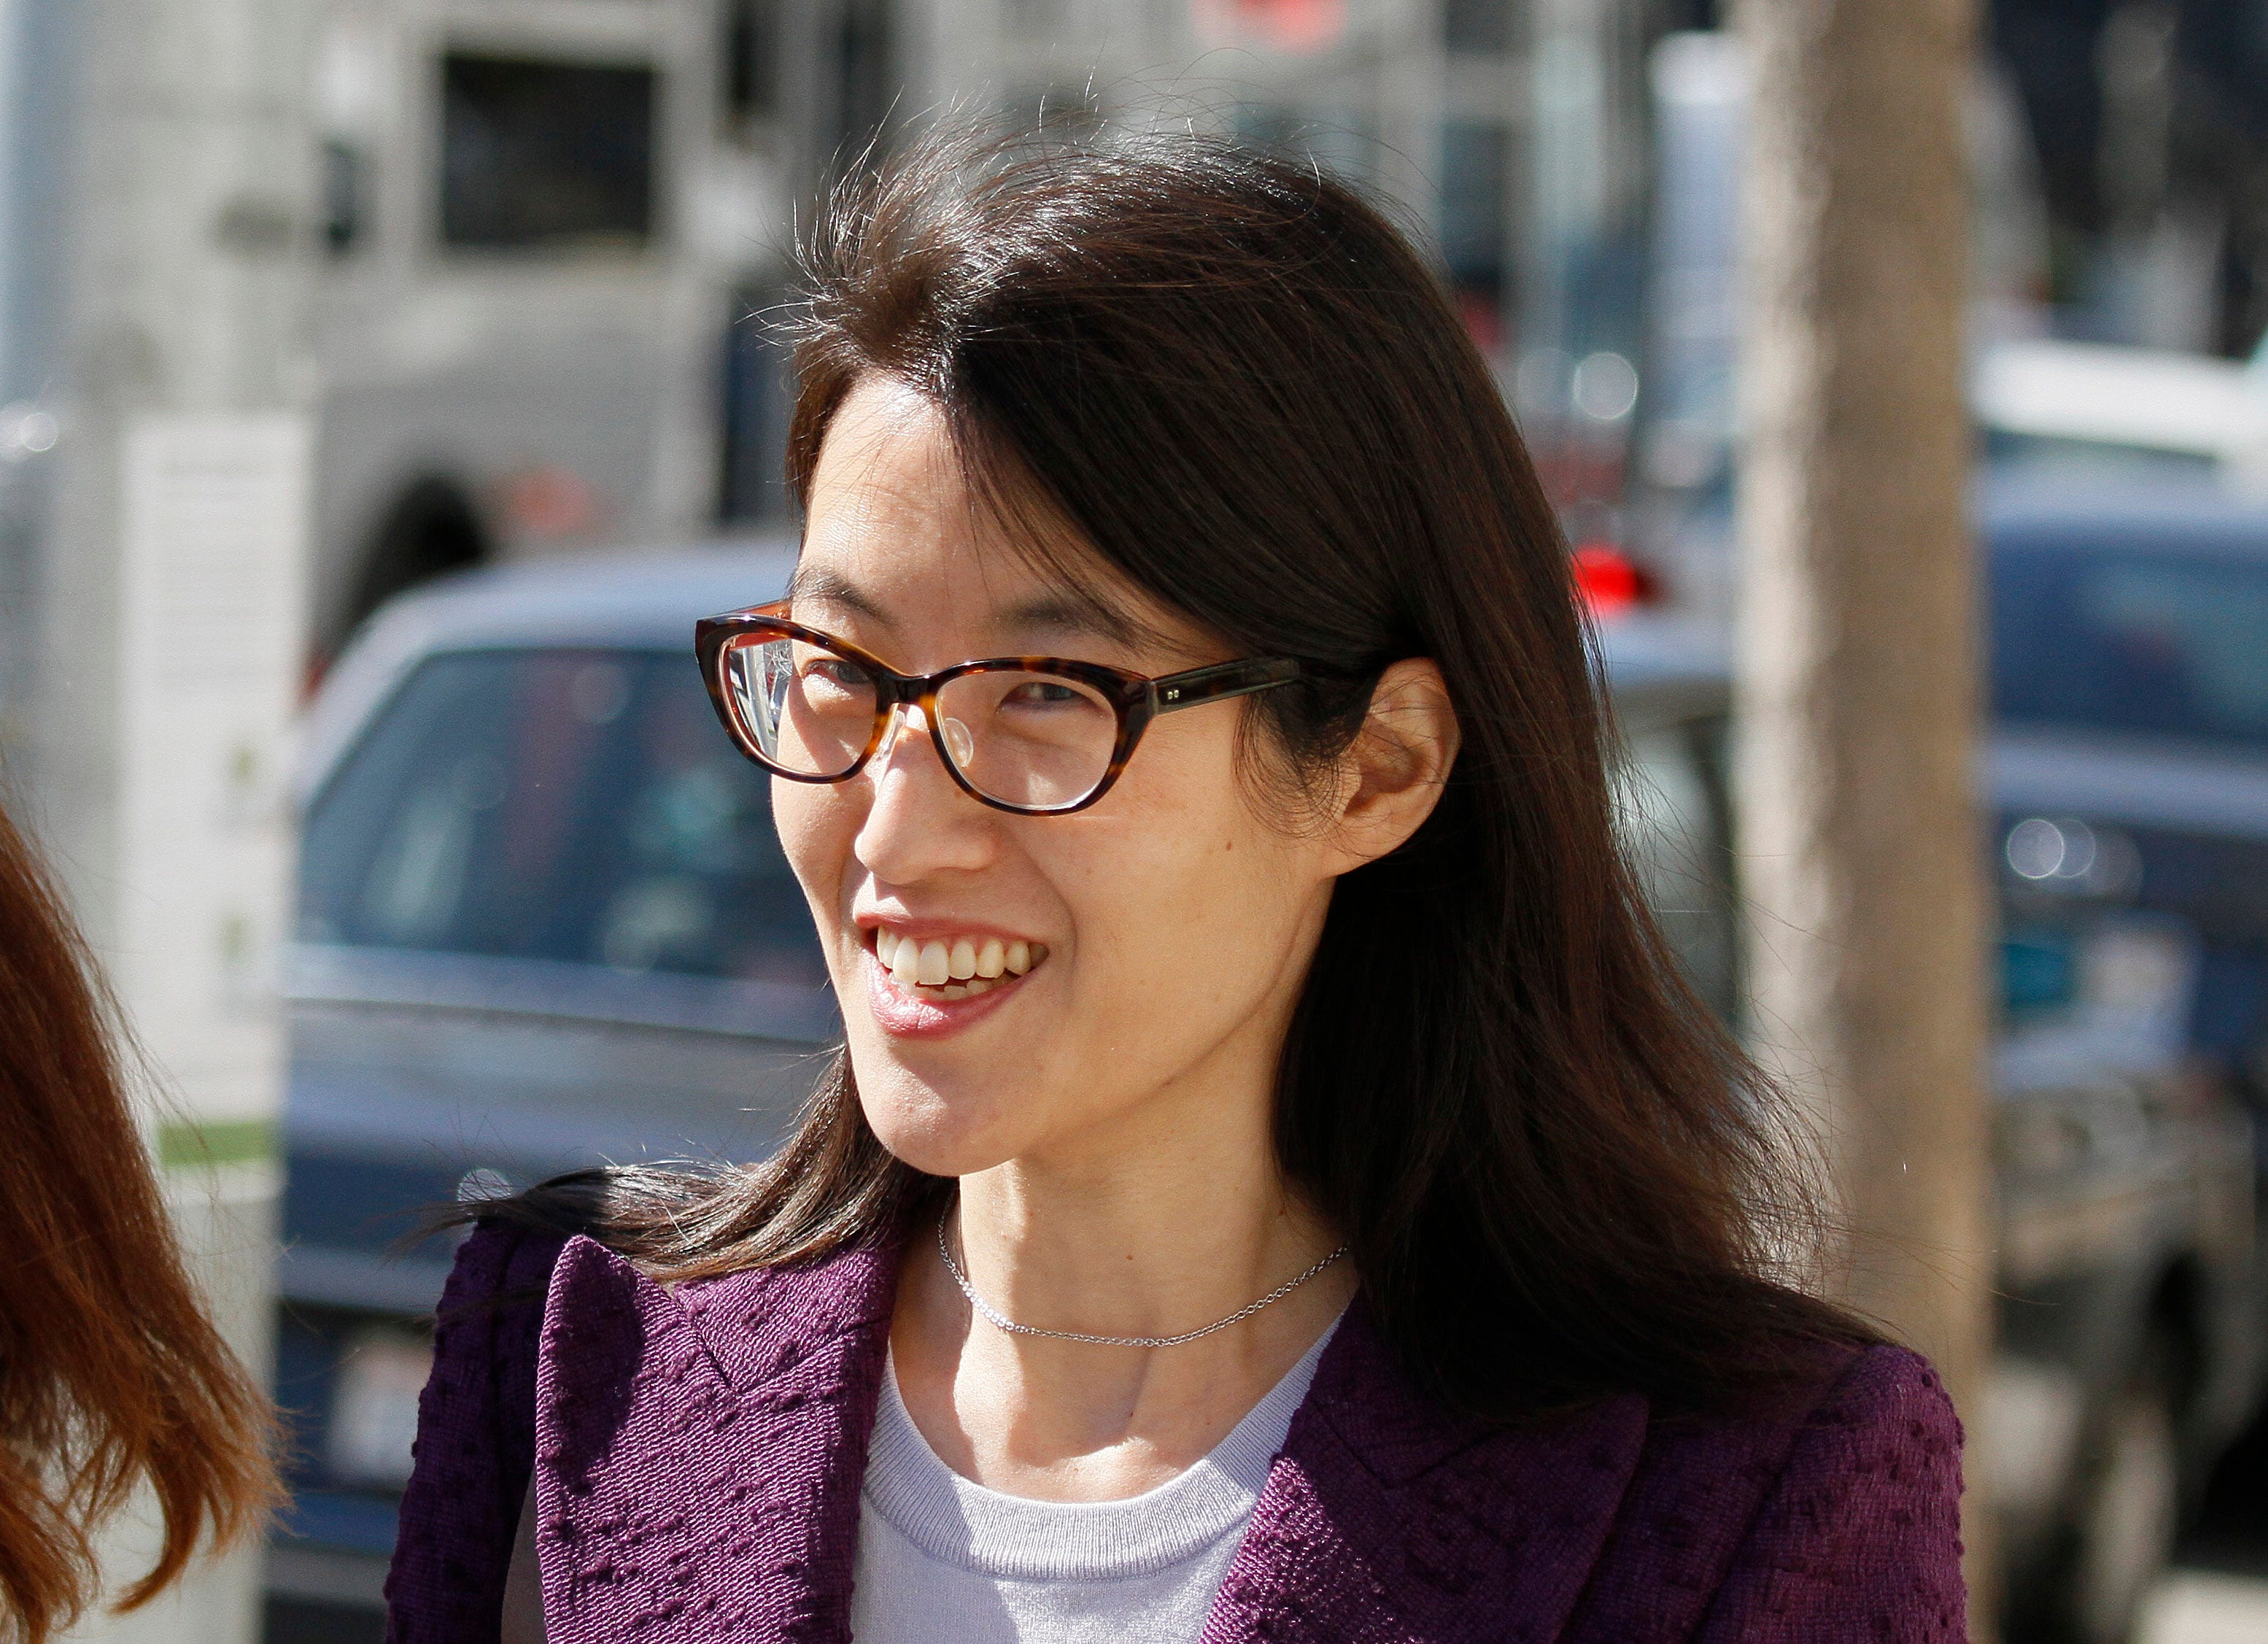 ELLEN PAO could have made $2.6 million as a senior partner